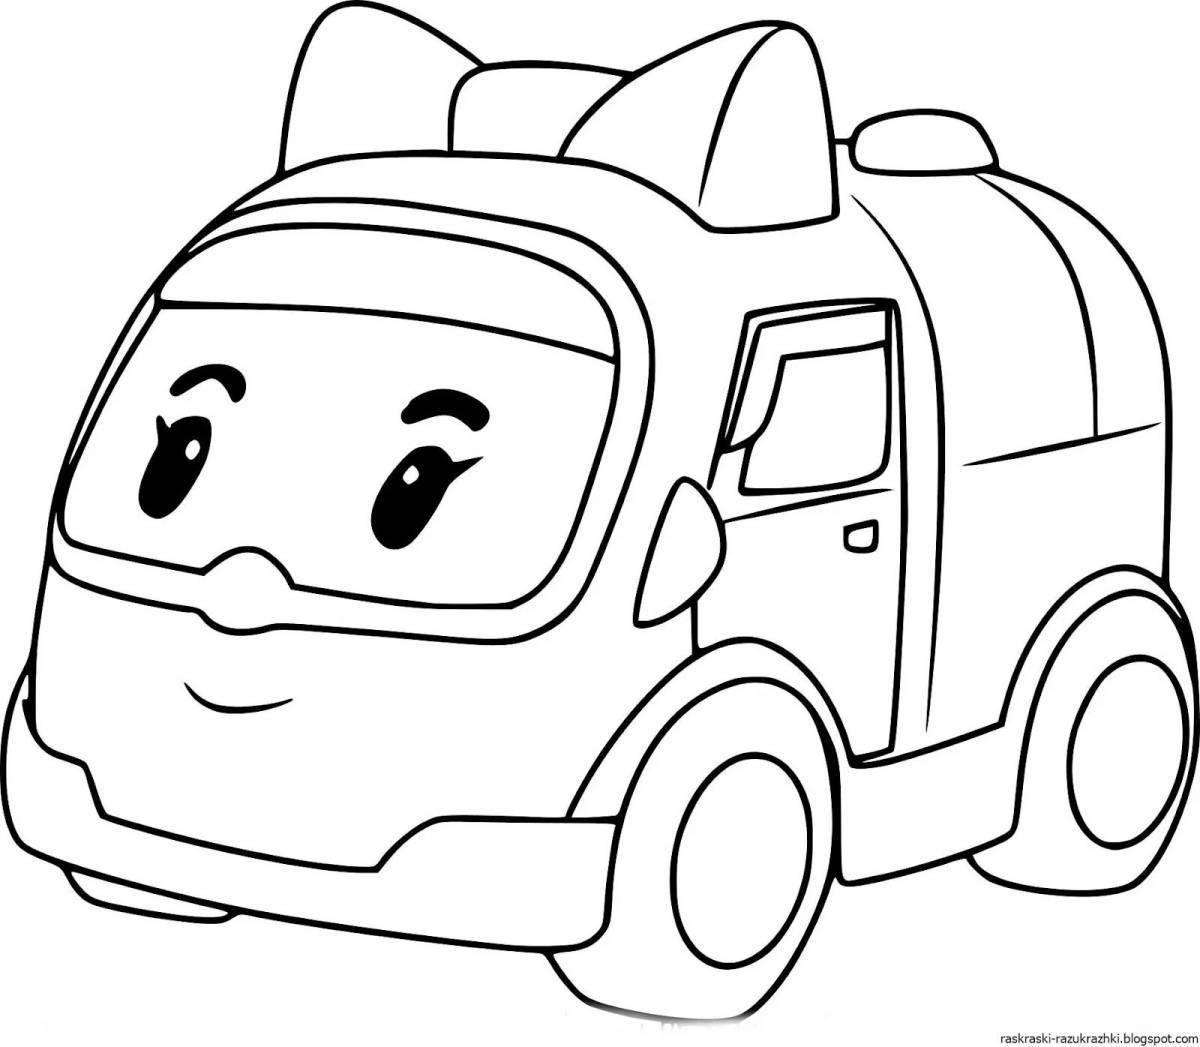 Attraction leva truck coloring page for kids